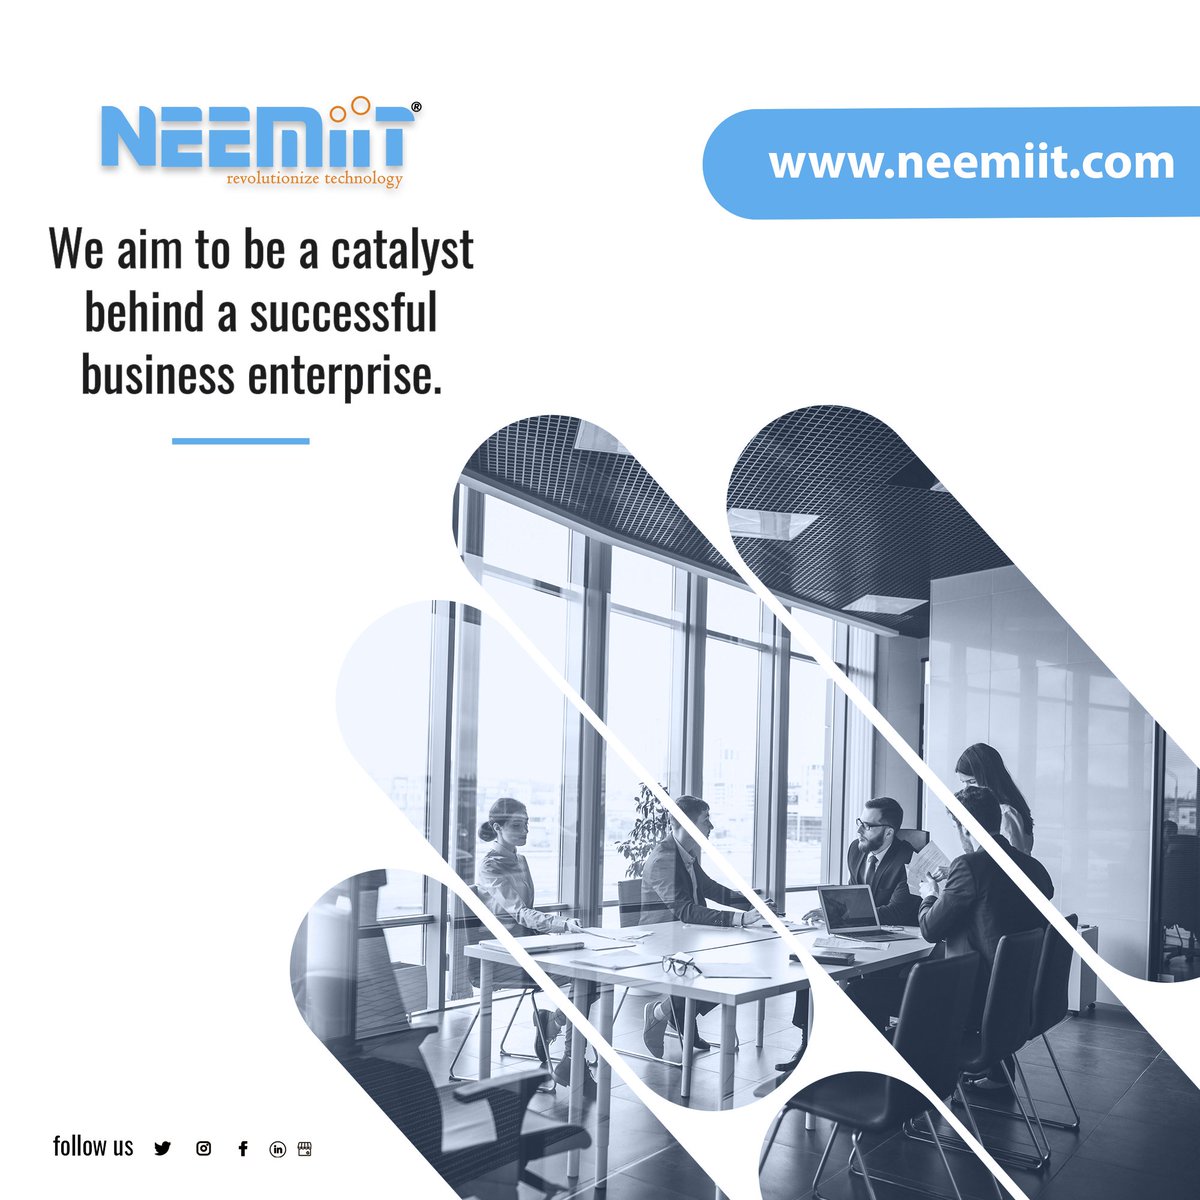 NEEMIIT is the answer for tech, business, and digital challenges. We'll ensure your business runs smoothly.

#stratergy #strategies #strategize #businesspackage #softwaresolutions #thoughts #innovations #dynamic #team #bestresults #bestsupport #bussinesssupport #designproducts